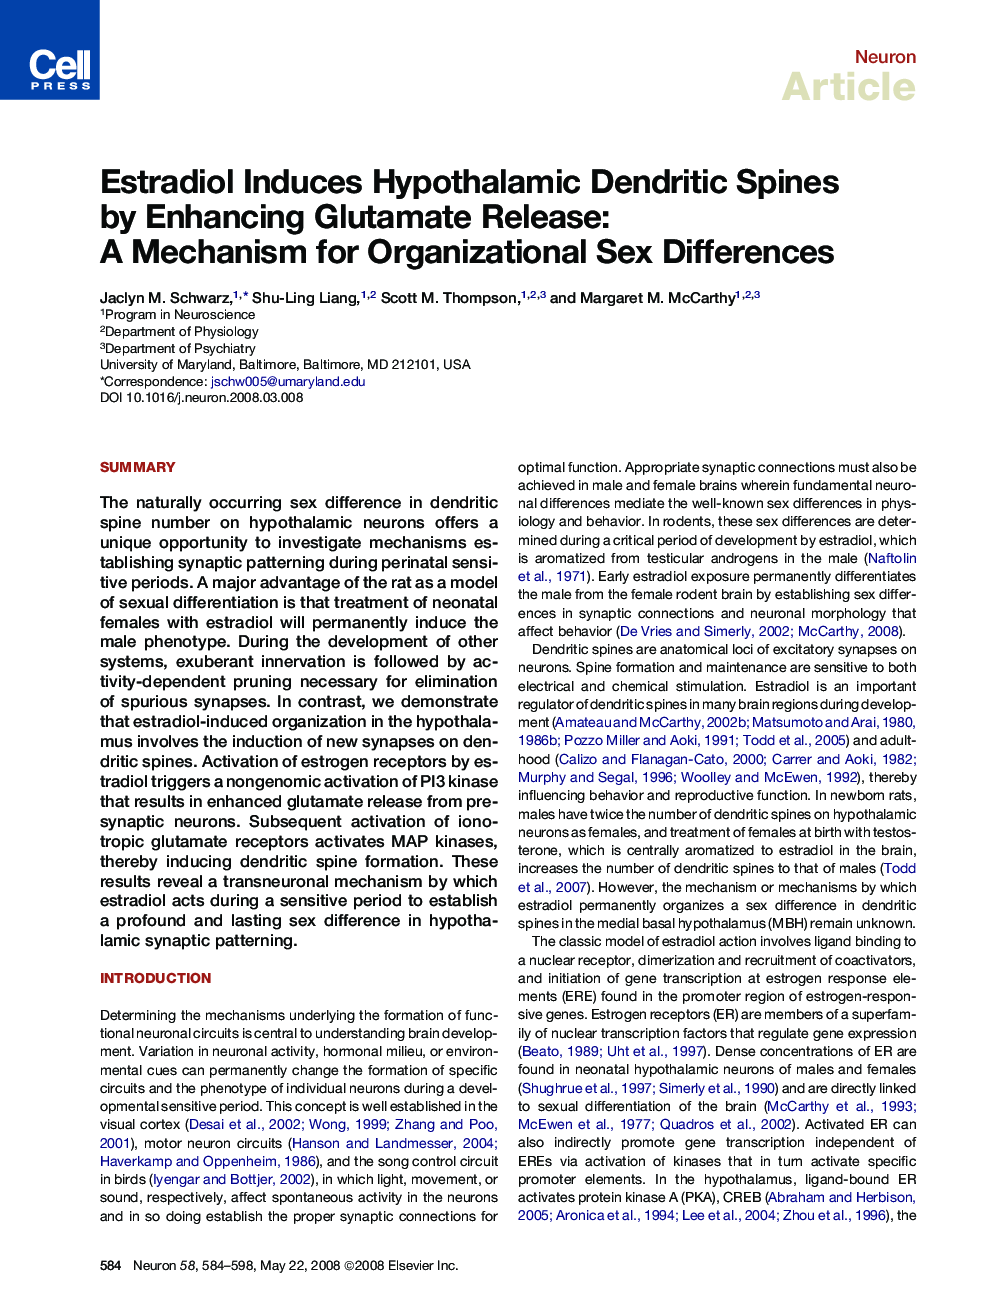 Estradiol Induces Hypothalamic Dendritic Spines by Enhancing Glutamate Release: A Mechanism for Organizational Sex Differences